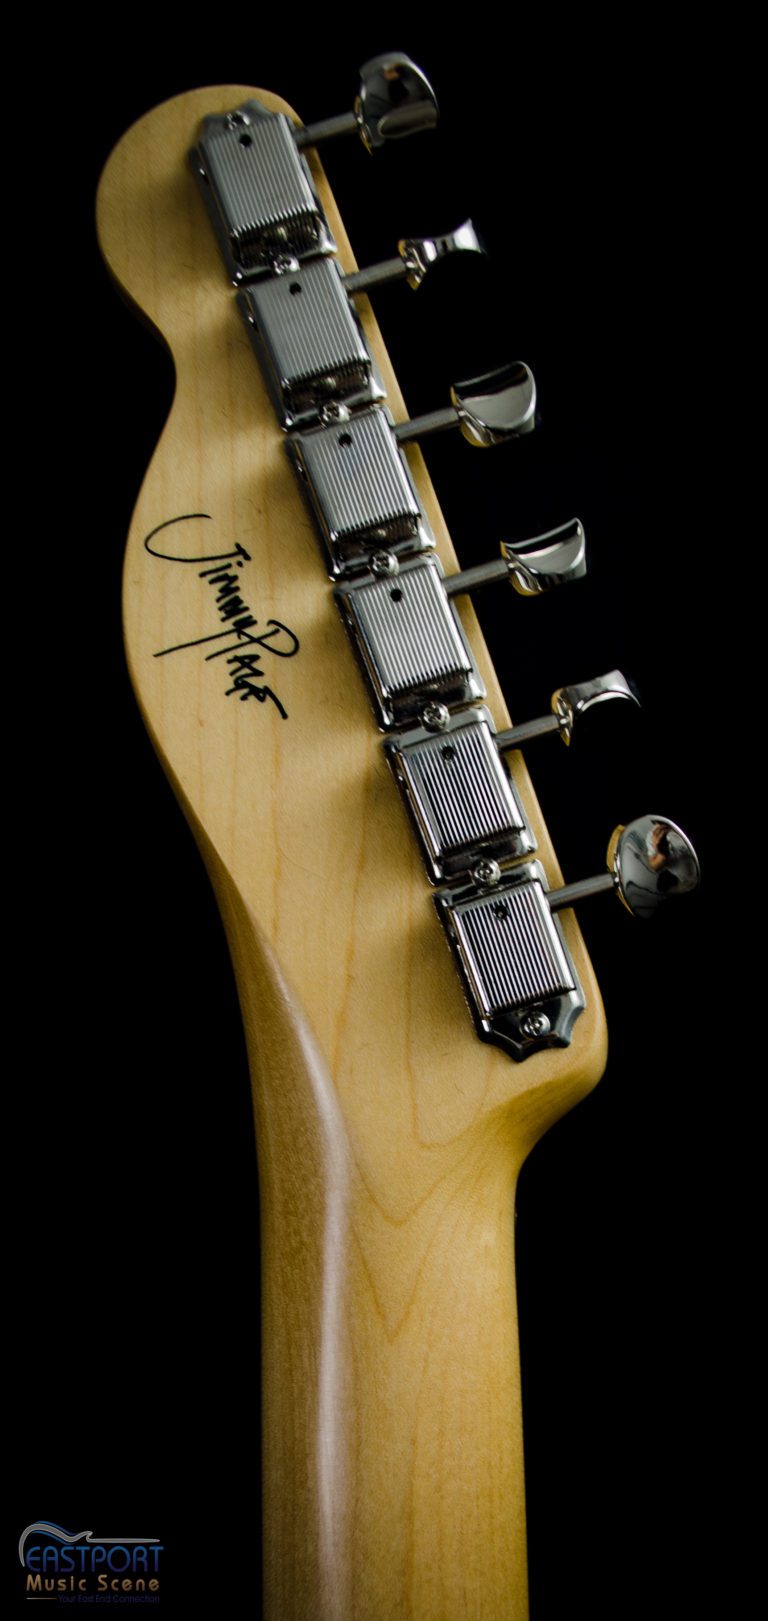 A close up of the headstock on an electric guitar.